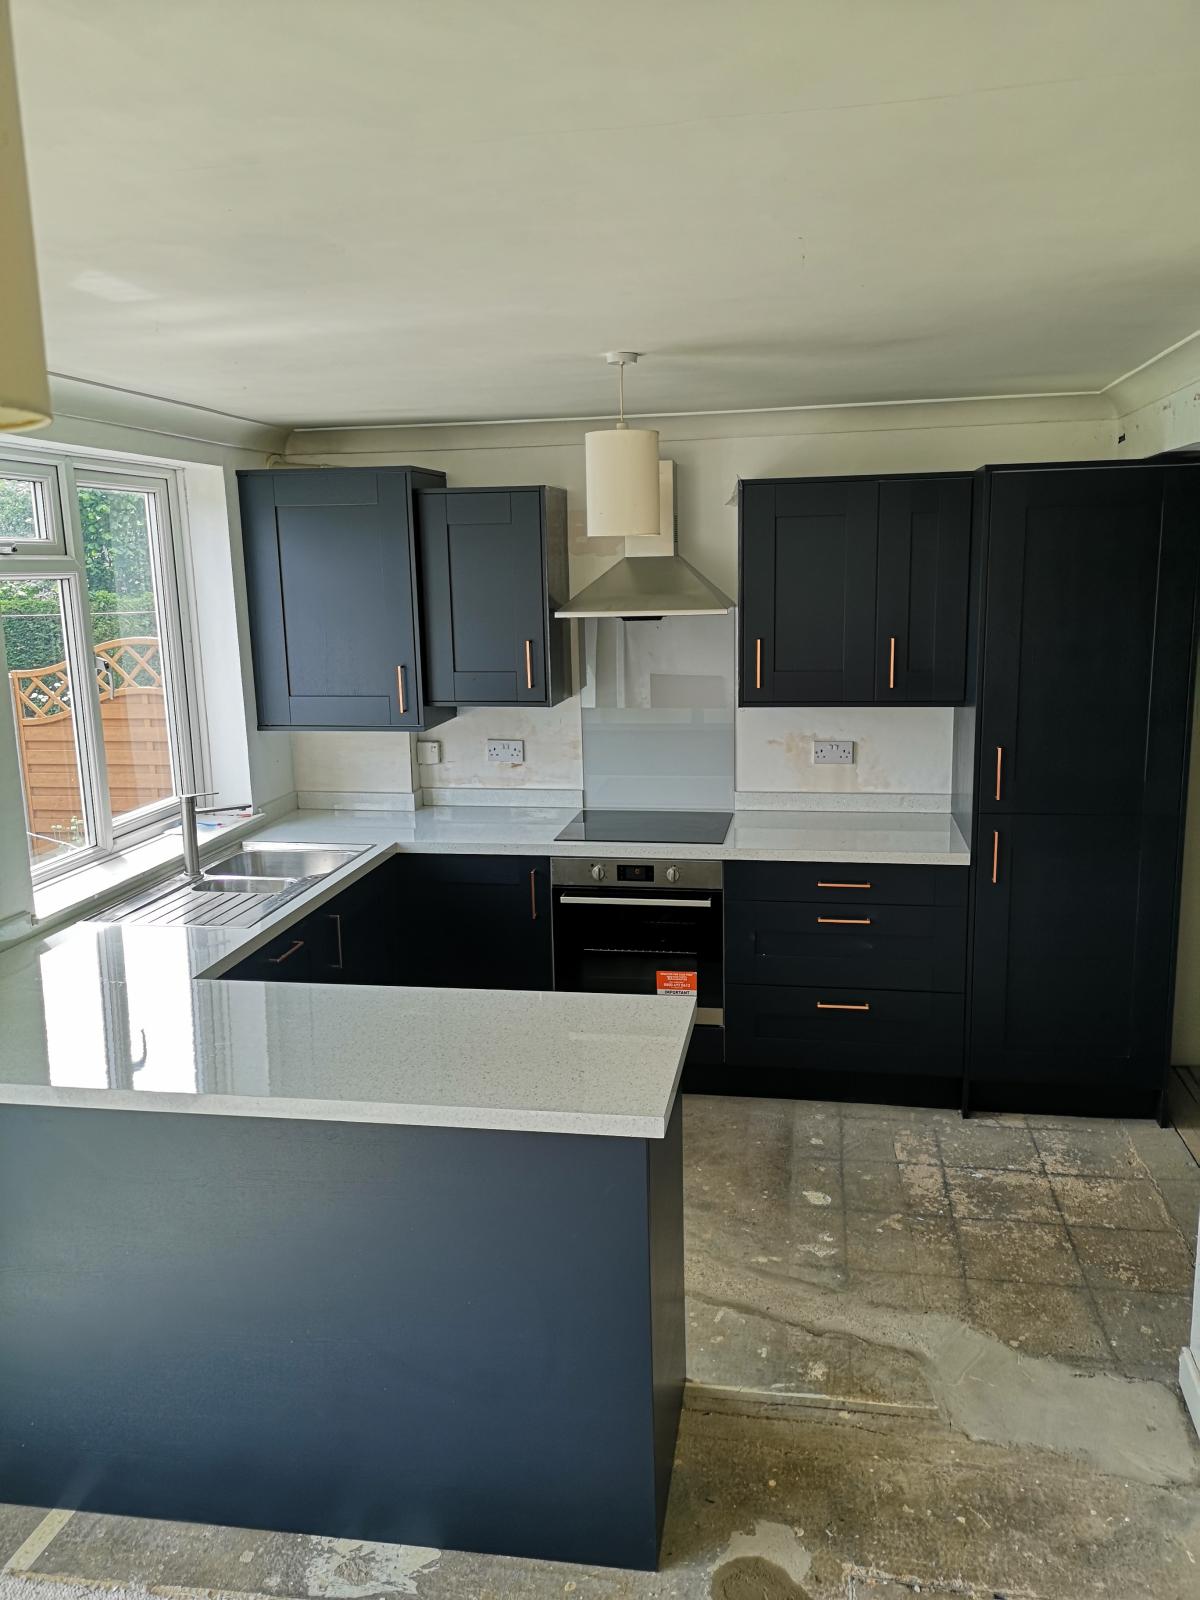 We commissioned Zebra Trades to install our new kitchen. Throughout the entire process, from the ini...